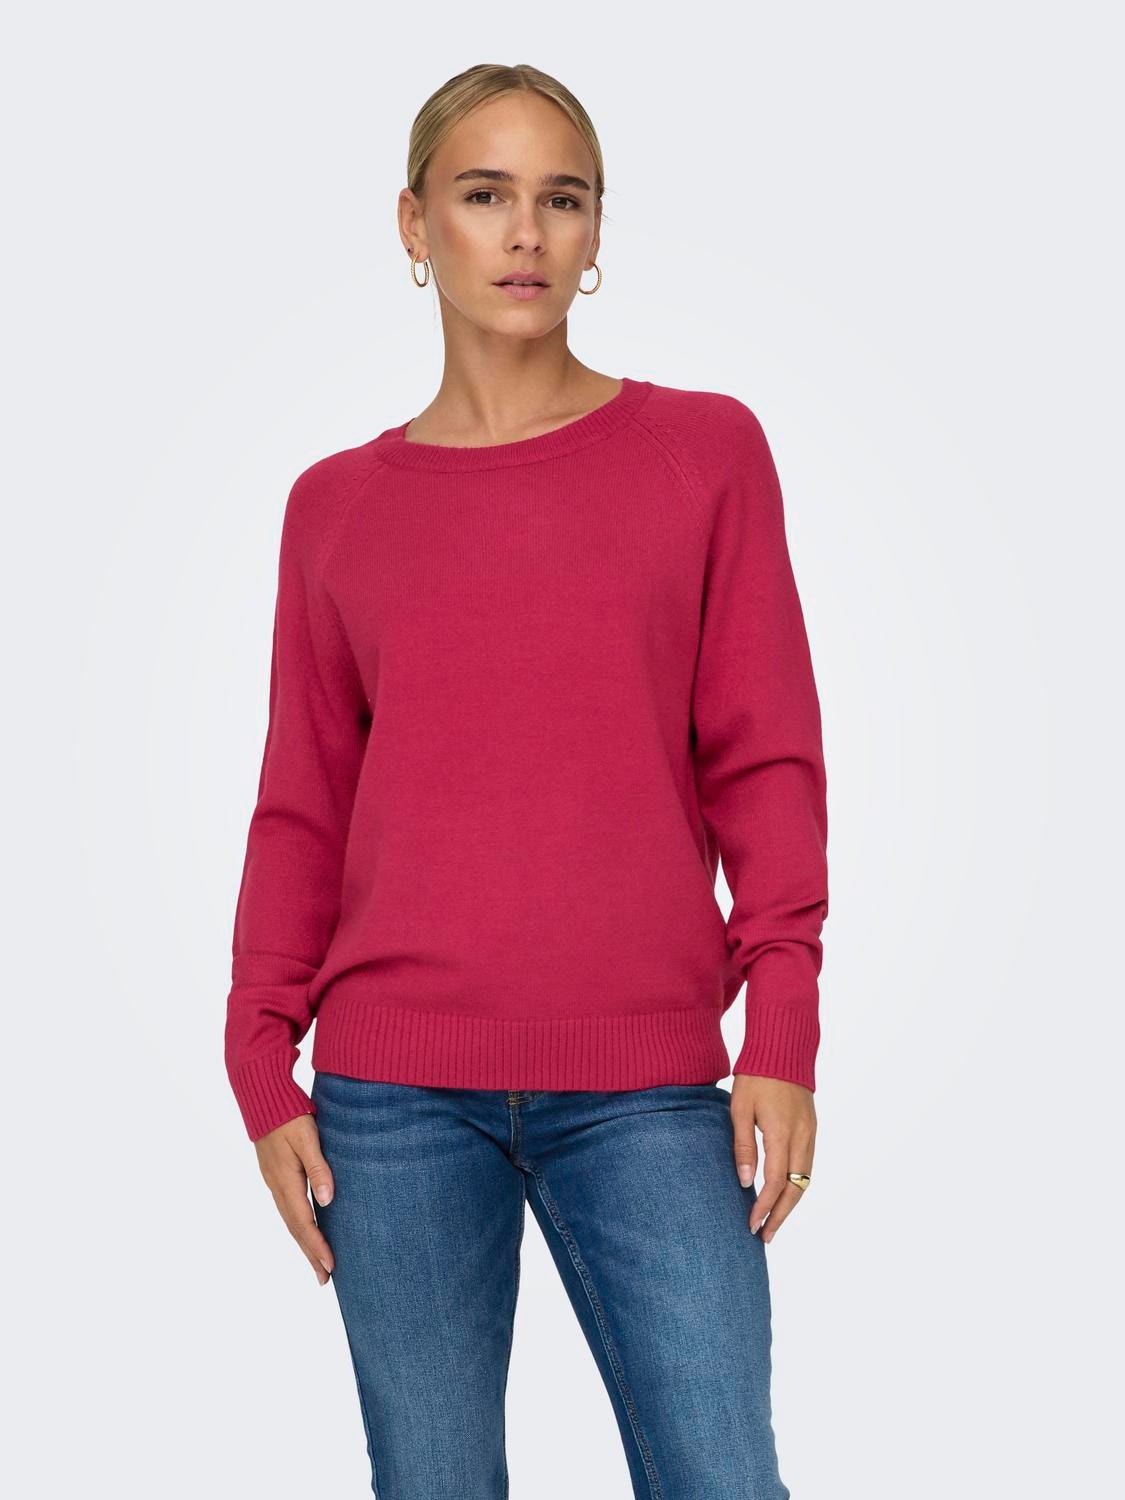 Solid colored Knitted ONLY® Pullover | 20% discount! with